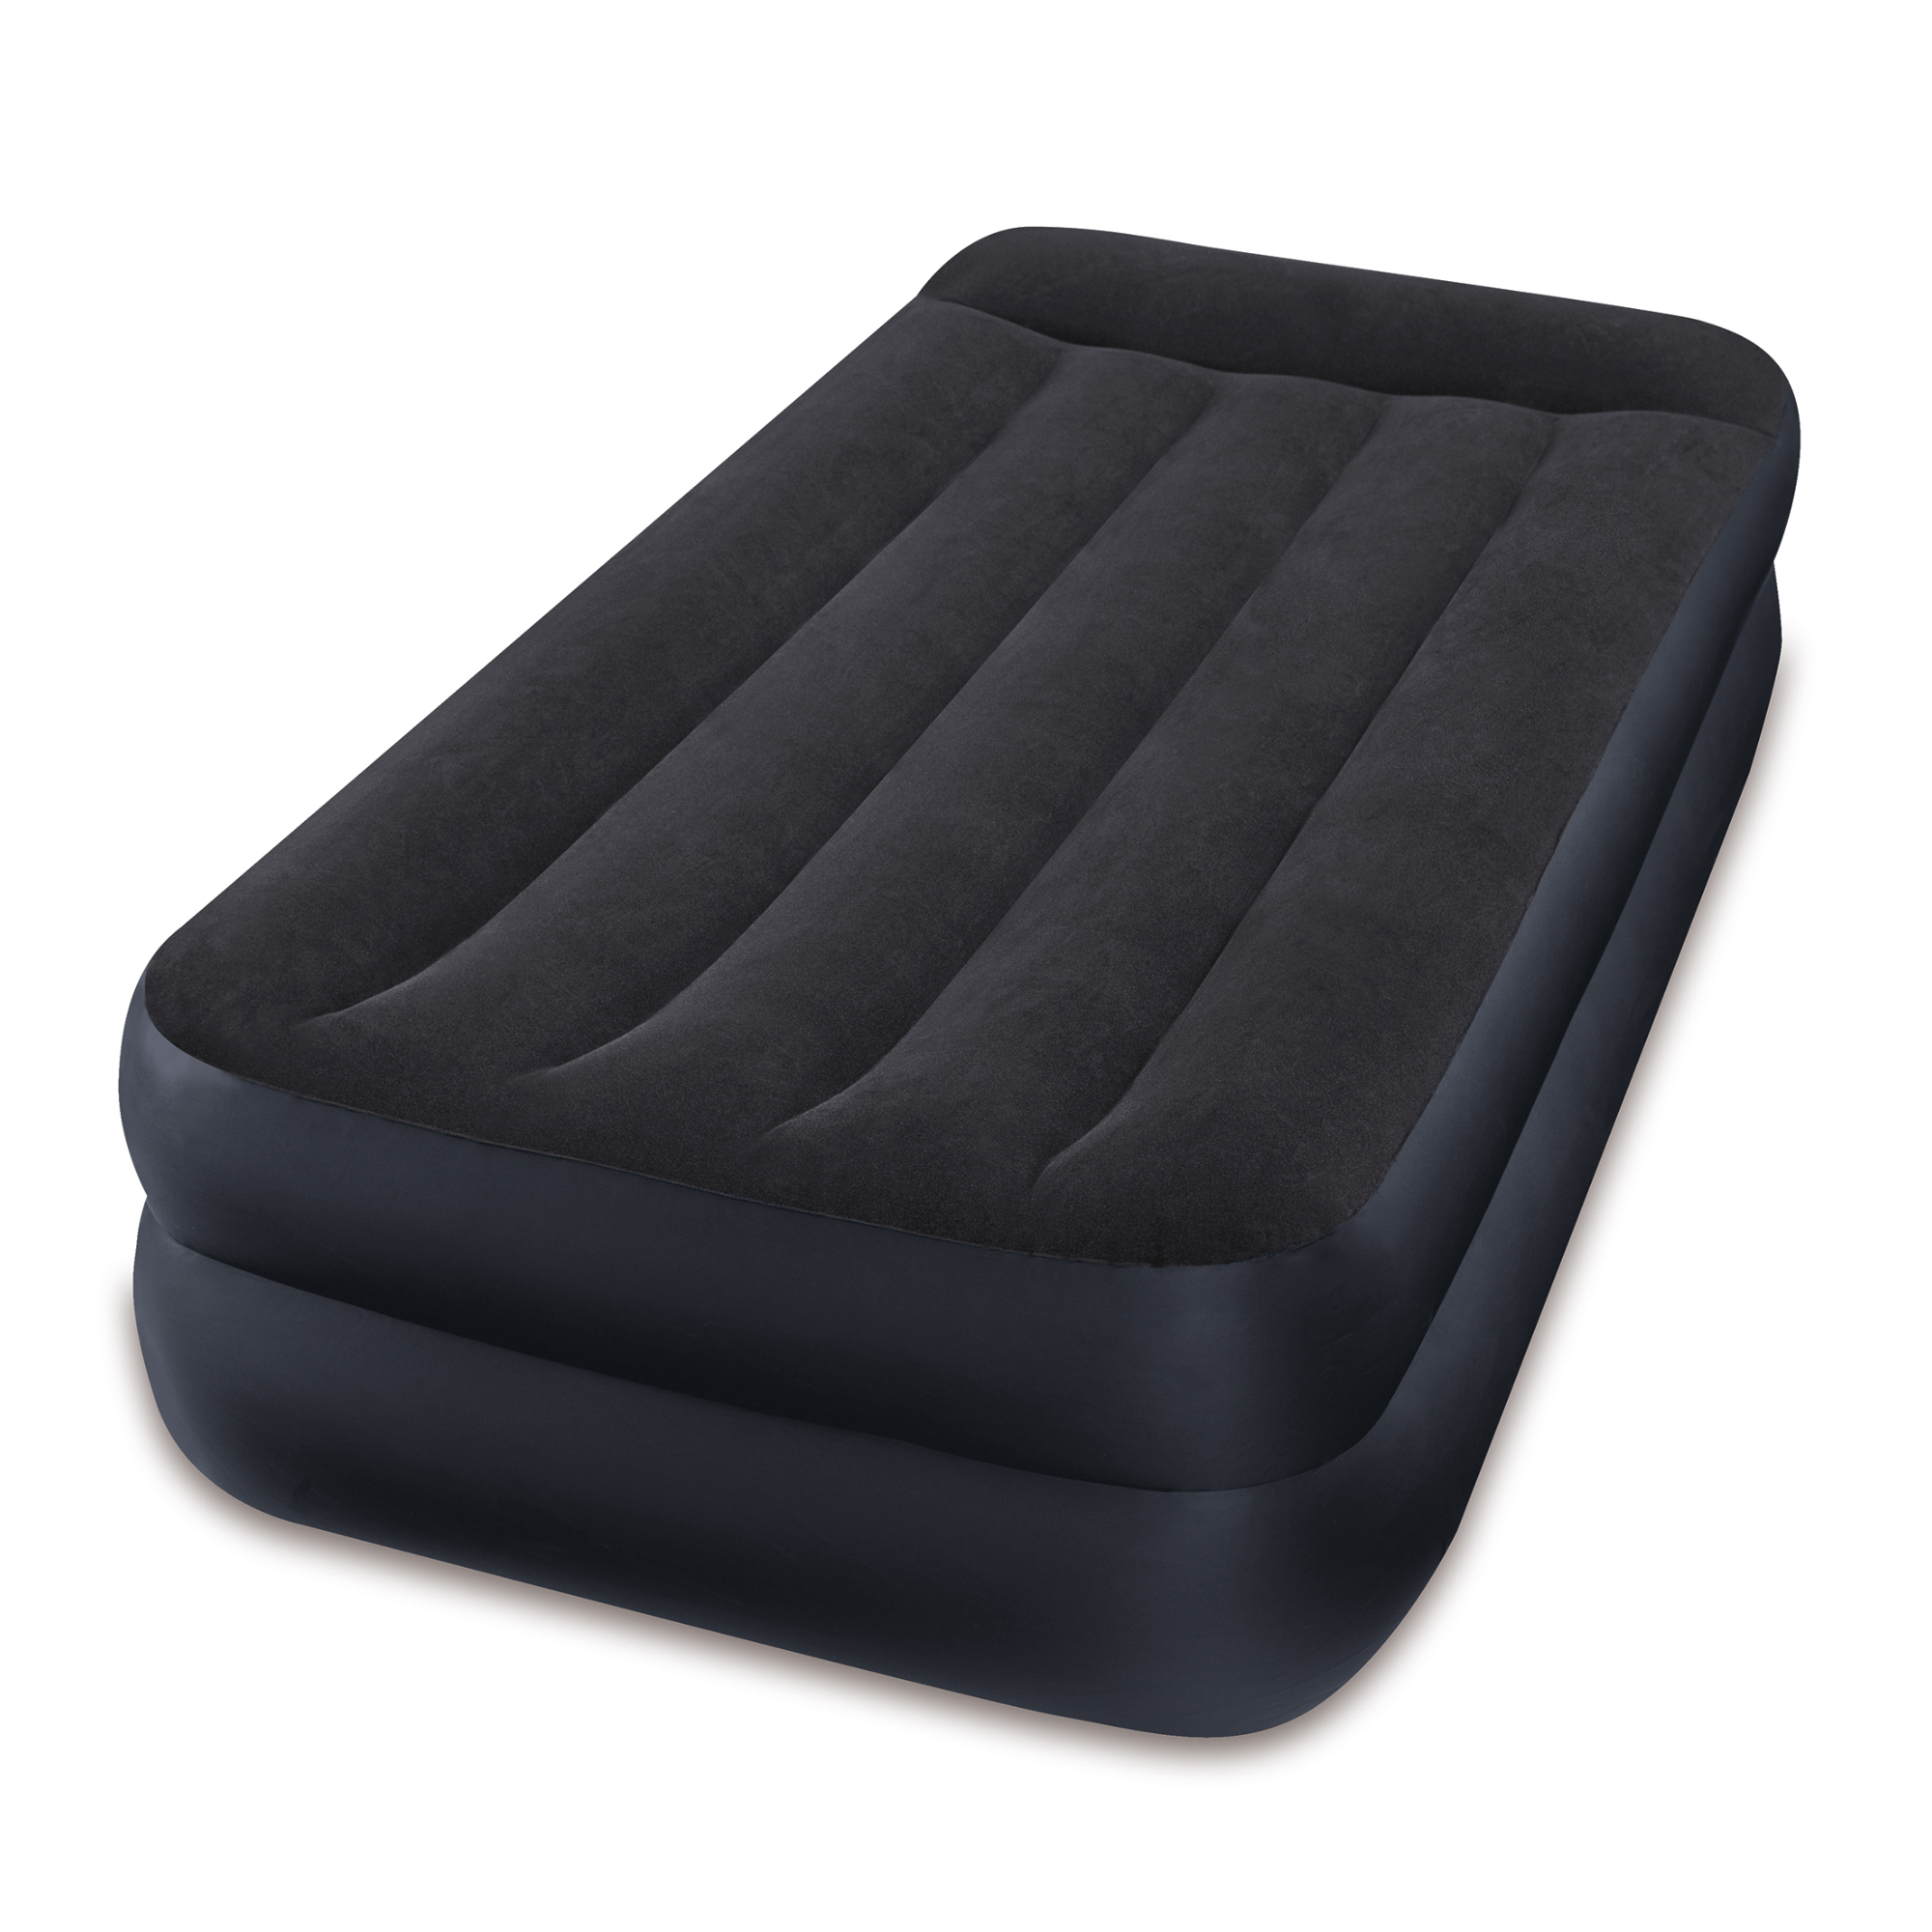 Intexrec Twin Pillow Rest Raised Airbed